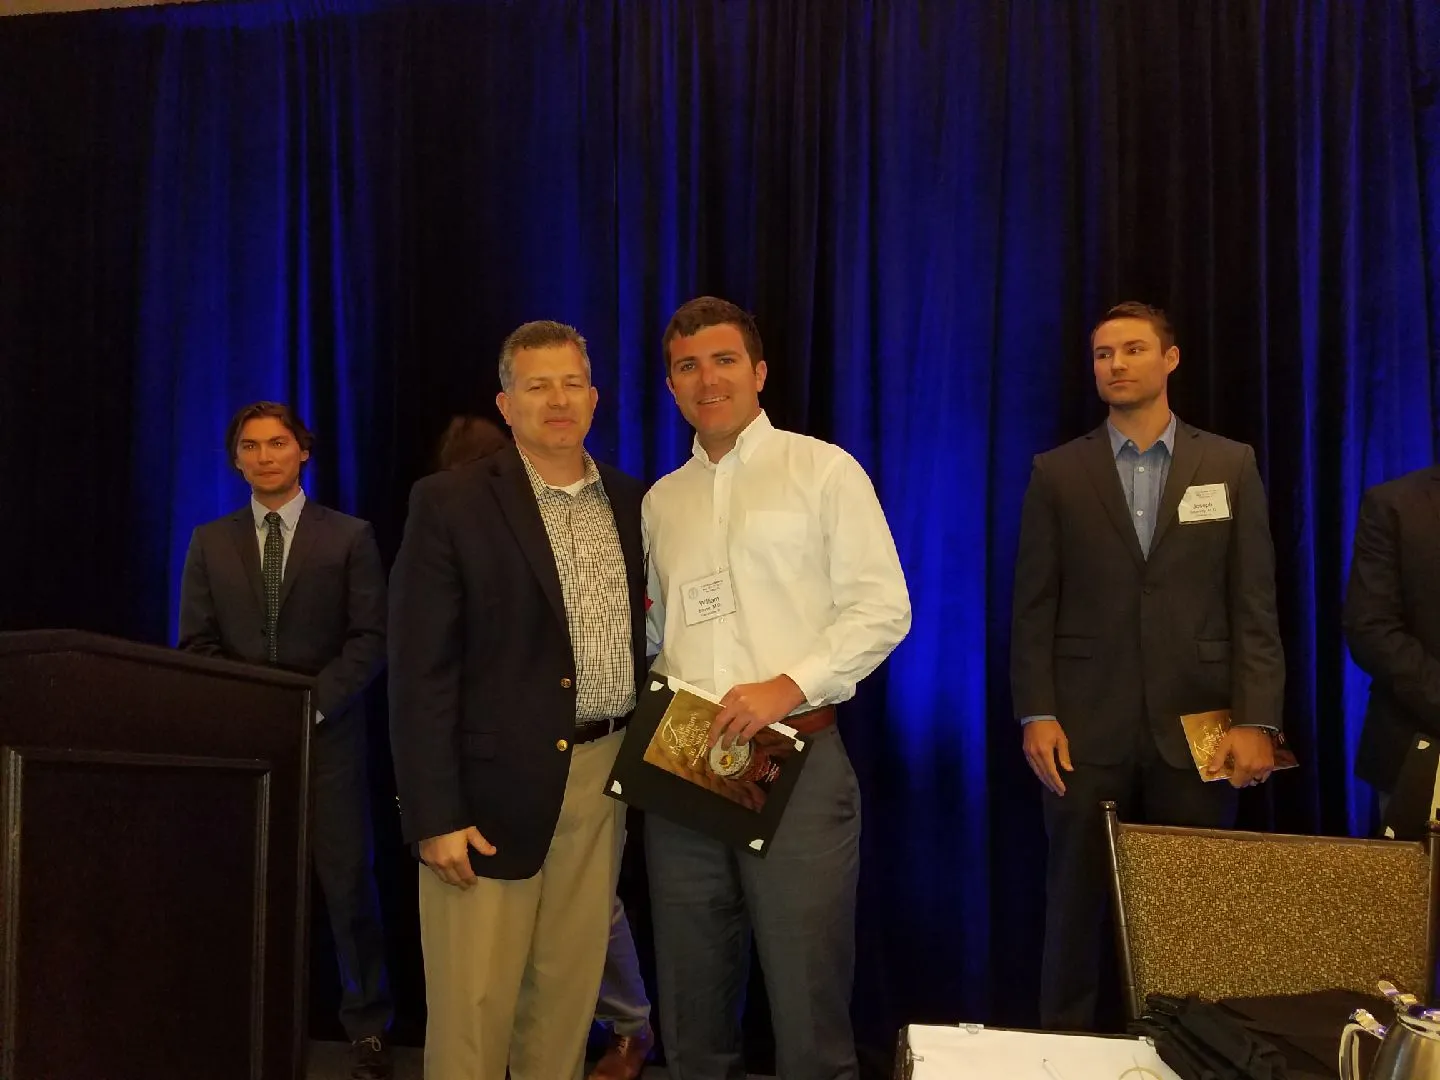 Zach Stone receives 1st Place Resident Research Award at 2017 FOS Annual Meeting